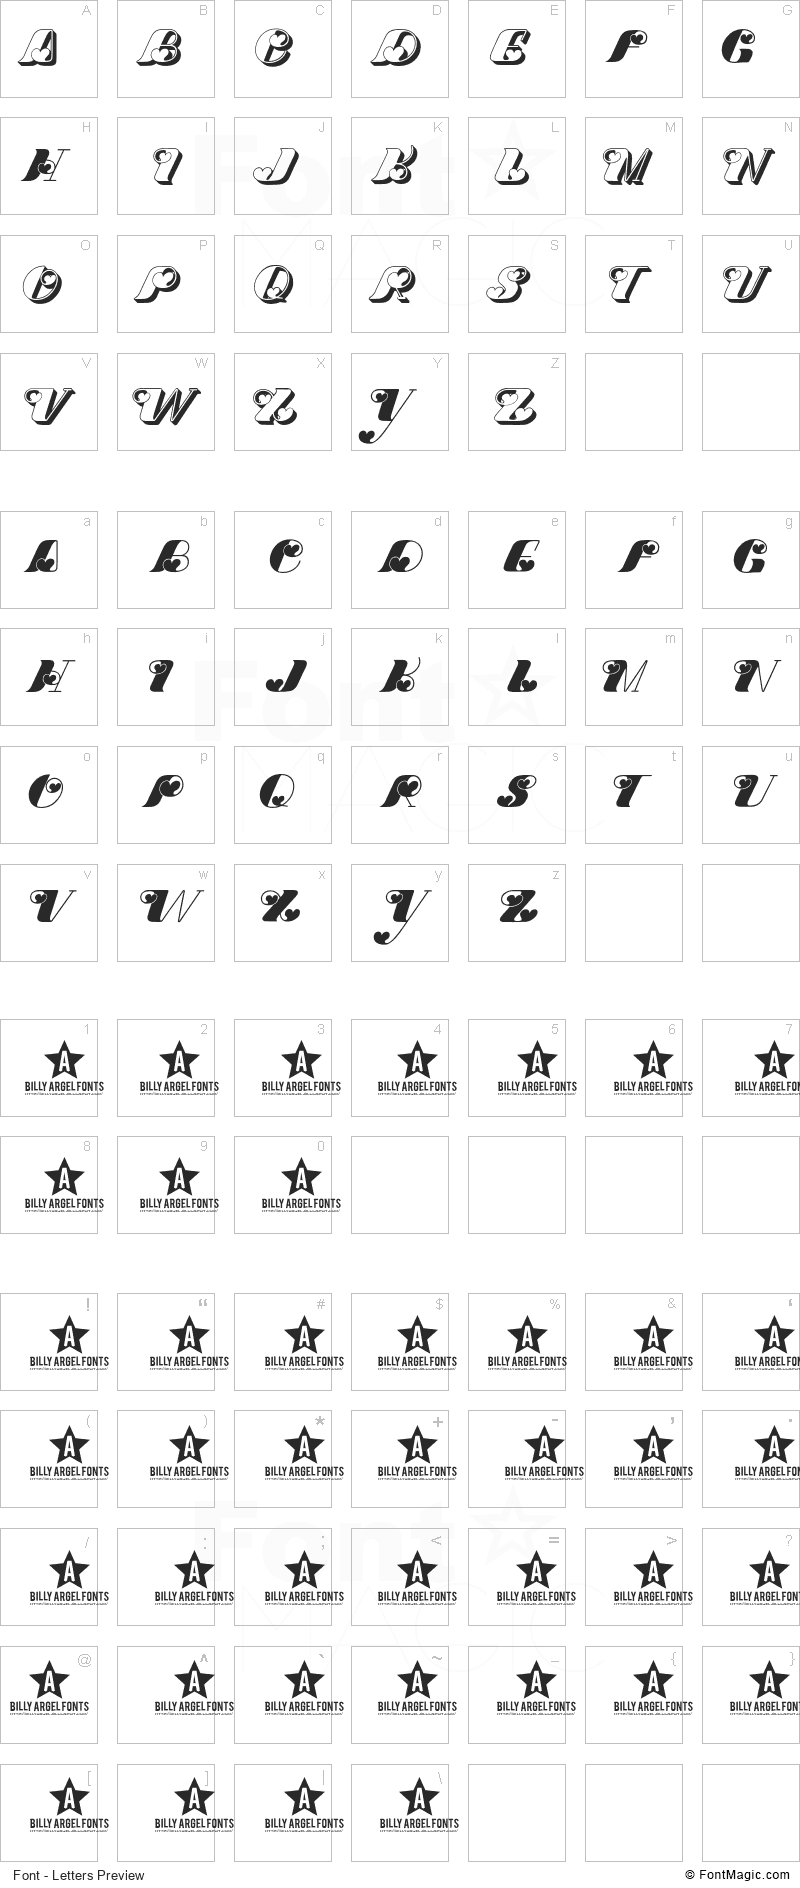 Dove Love Font - All Latters Preview Chart